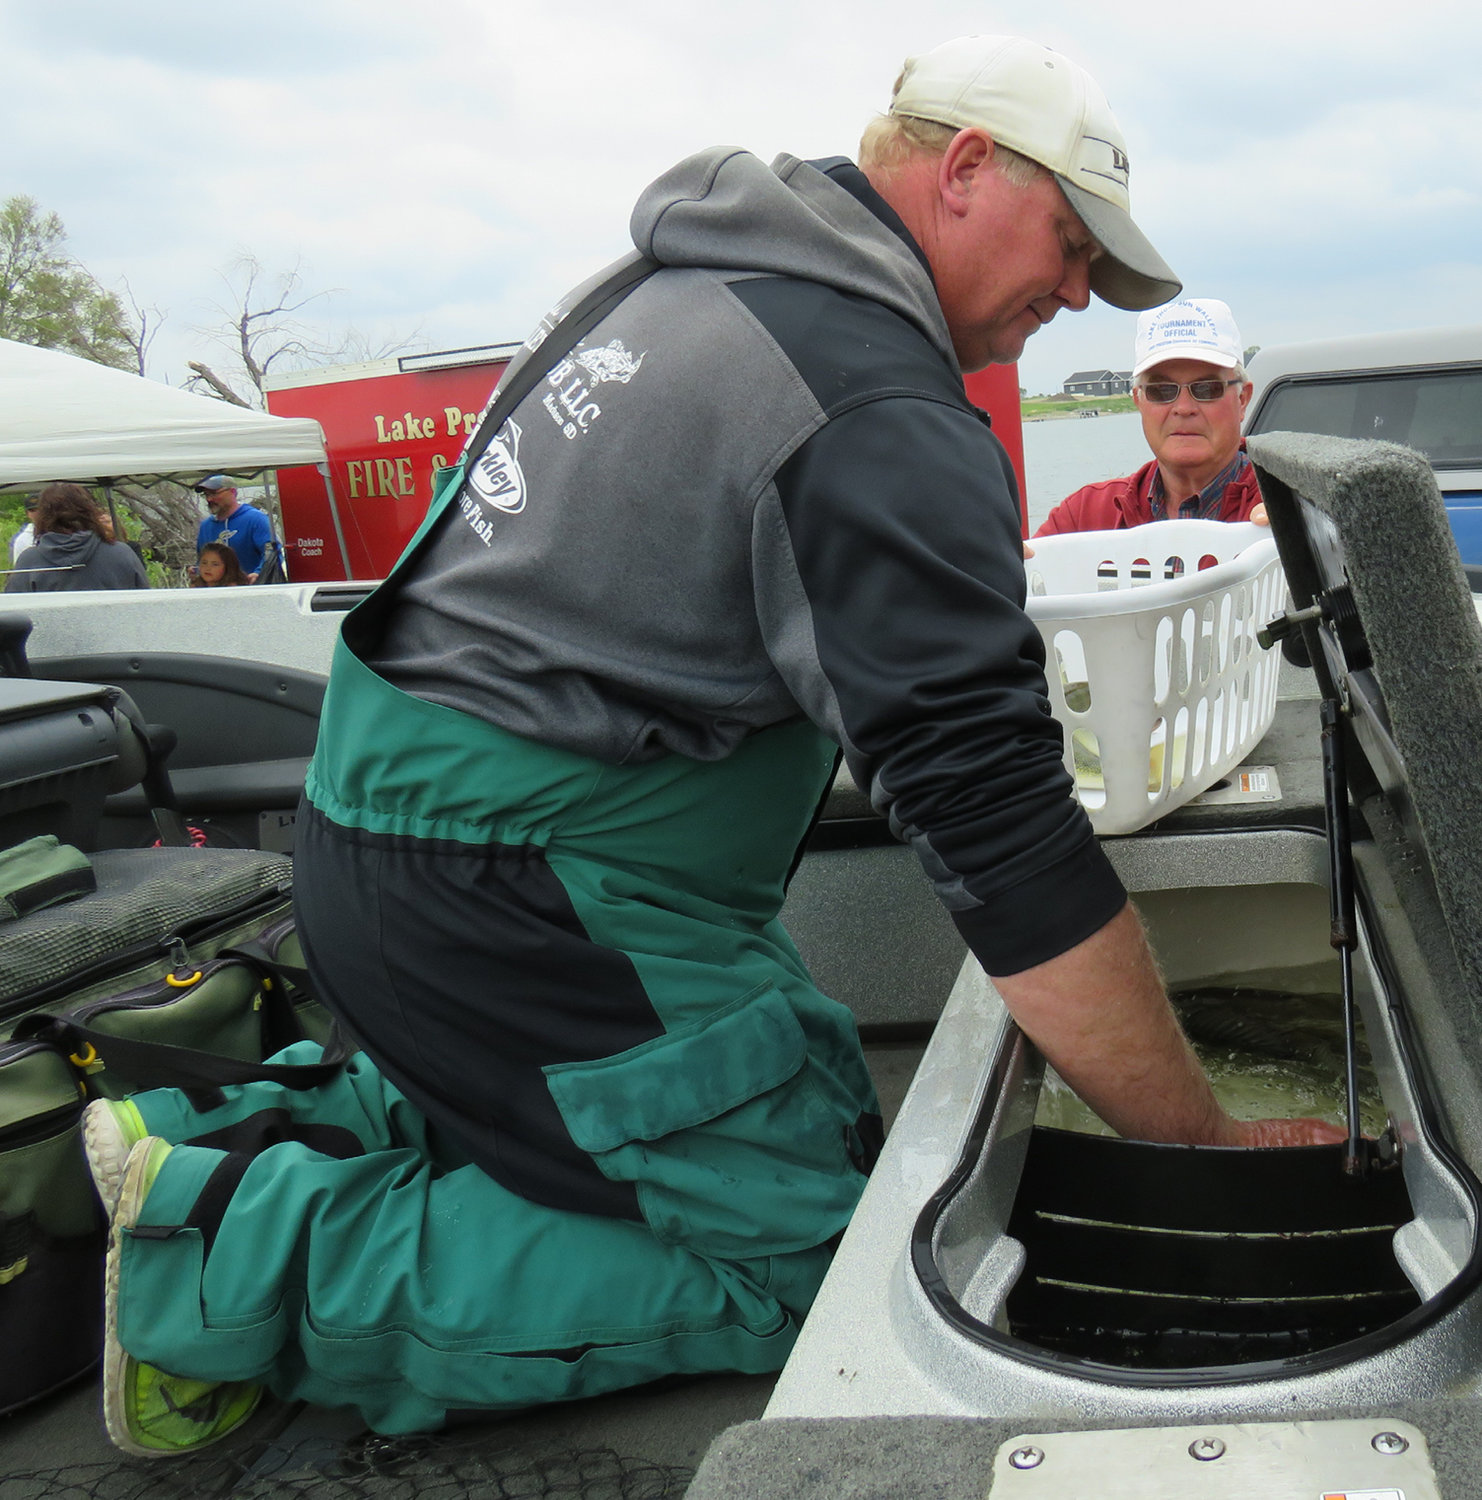 James Molengraaf of White, S.D., is pulling fish out of the livewell for Sunday's weigh-in at the 33rd Annual Lake Thompson Walleye Tournament. Molengraaf has participated in this event for many years and is consistently a top finisher.